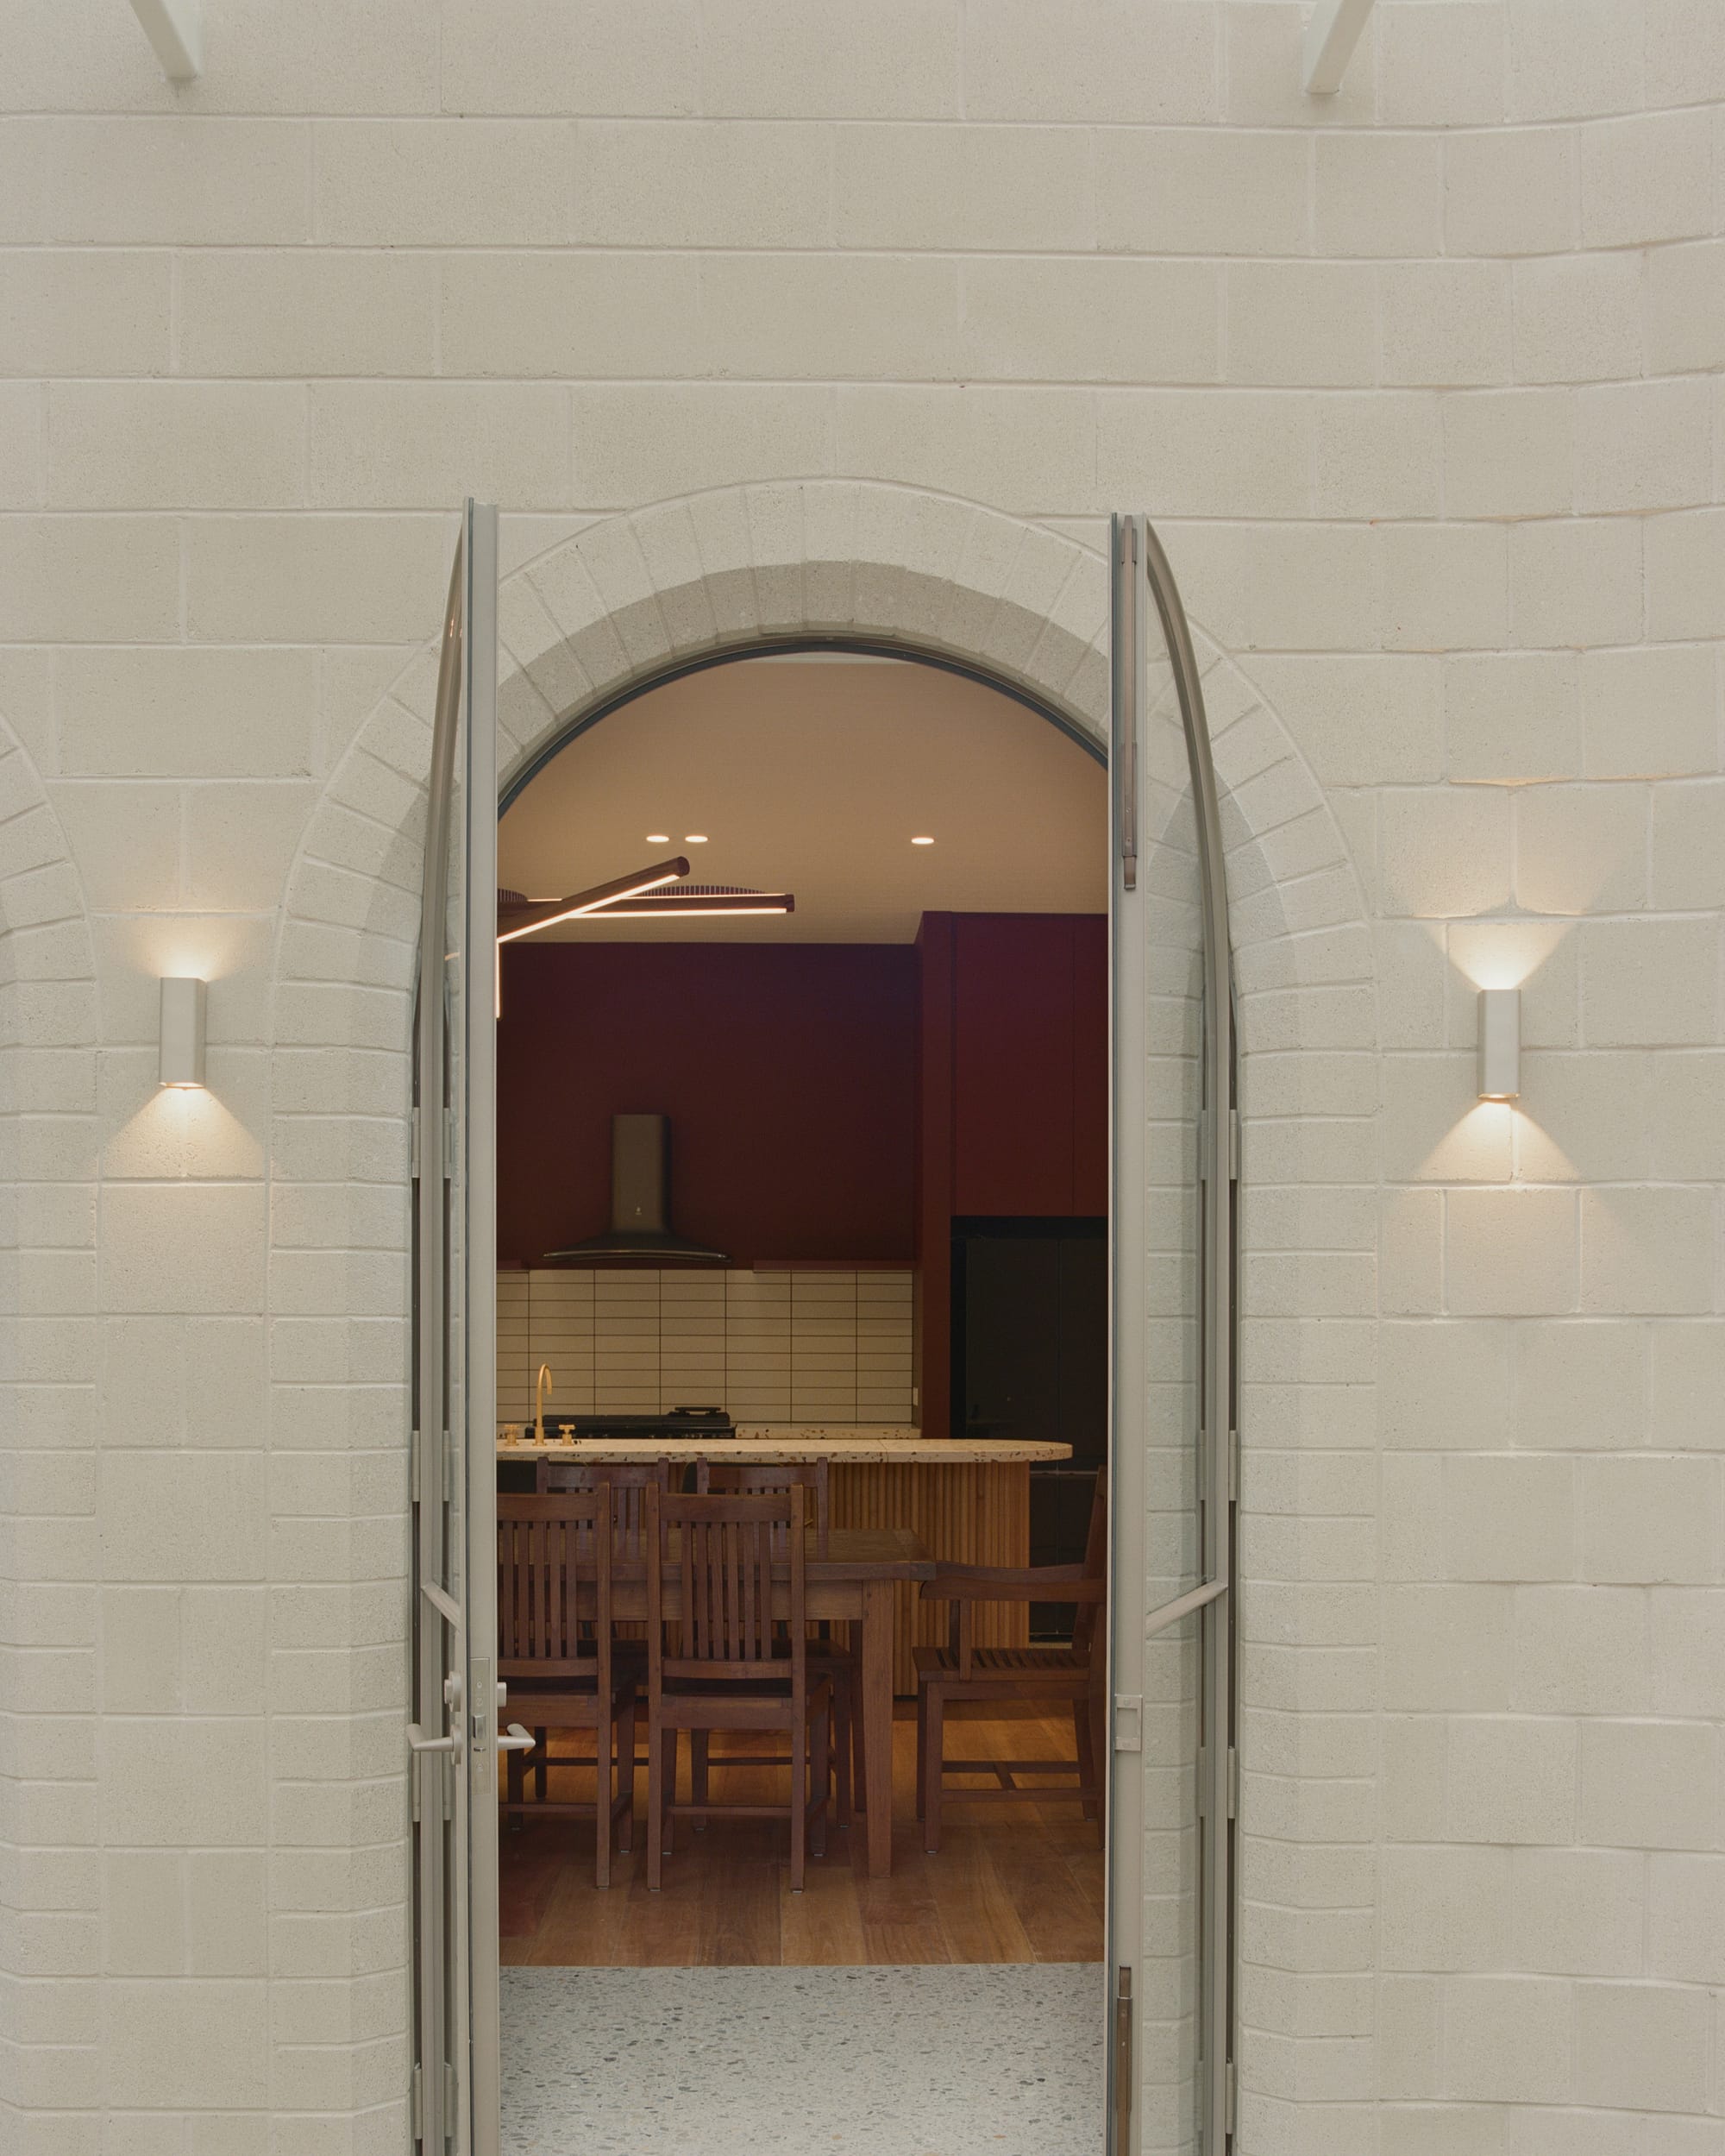 The focus is on an arched double door set in a white brick wall, leading into an interior space with a wooden dining table and chairs. The indoor lighting casts a warm glow contrasting with the natural light outside